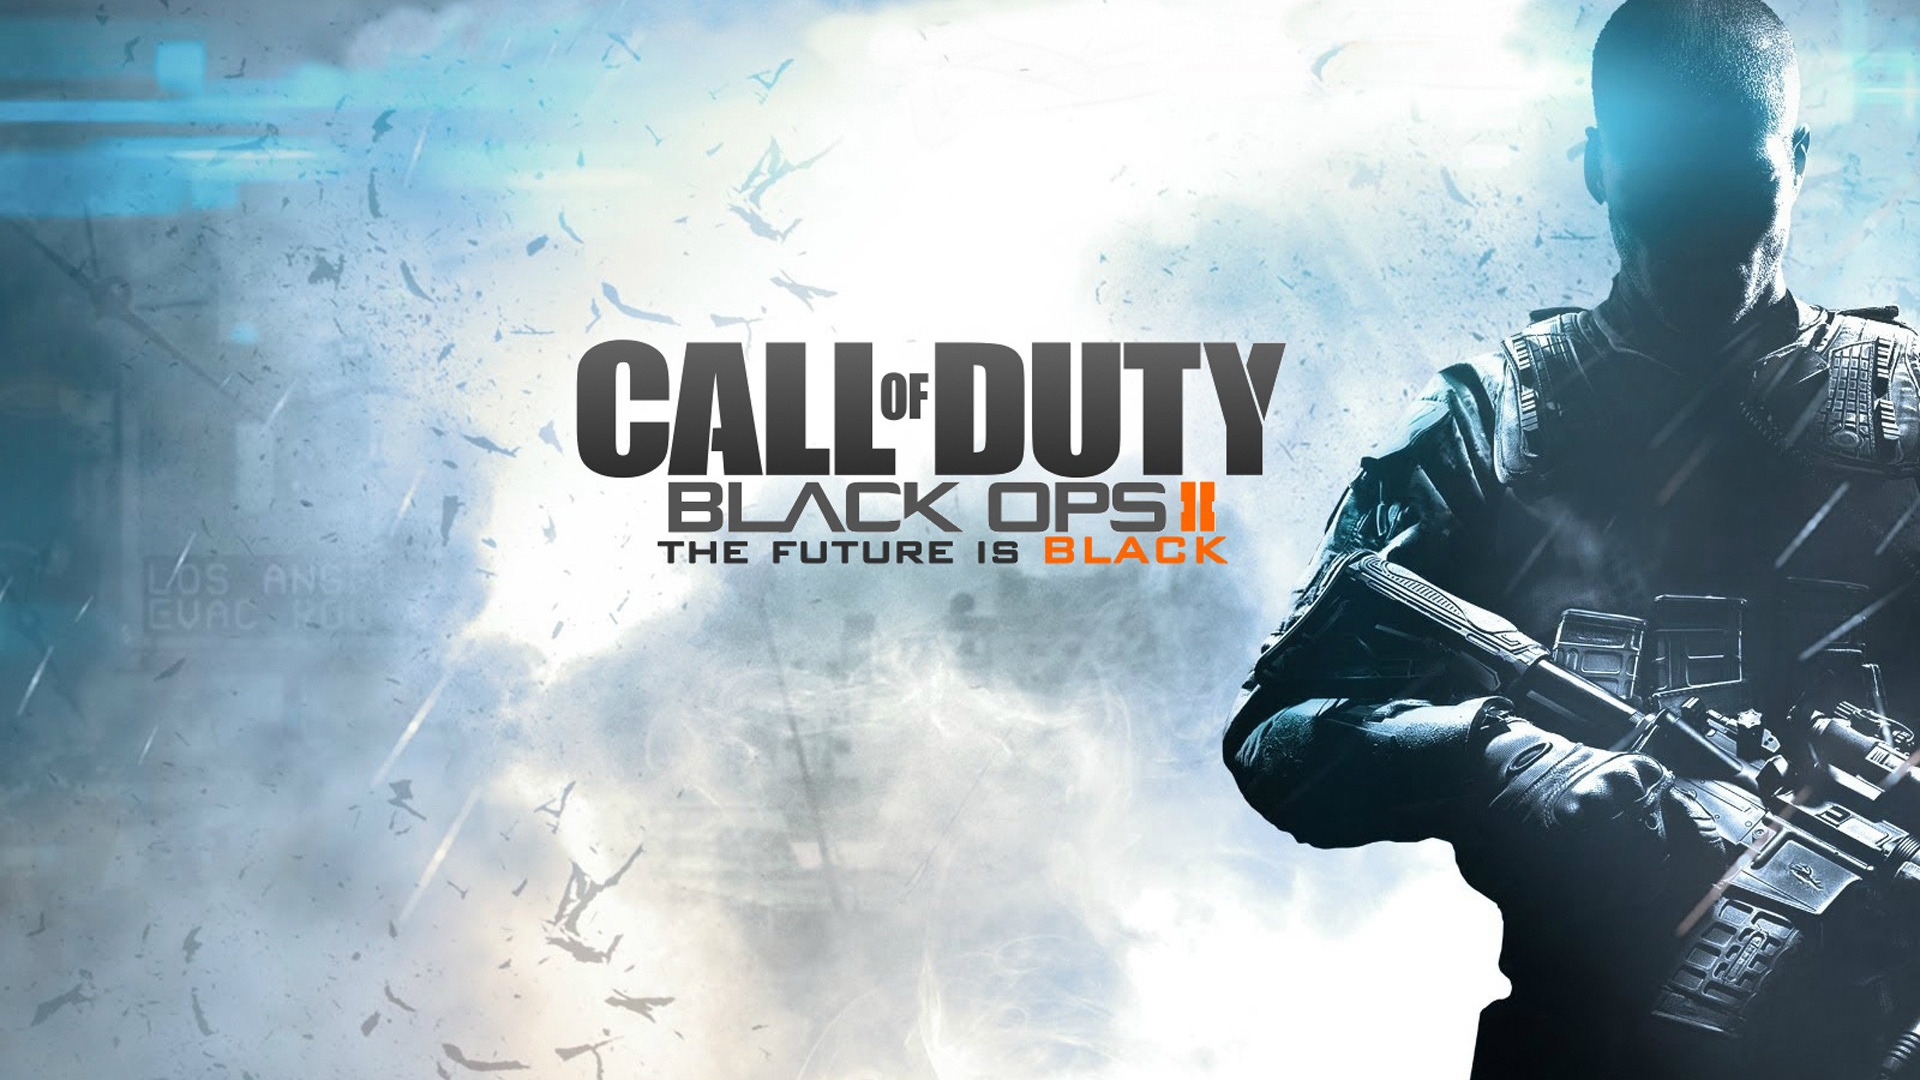 Call of Duty Black Ops 2 for 1920 x 1080 HDTV 1080p resolution